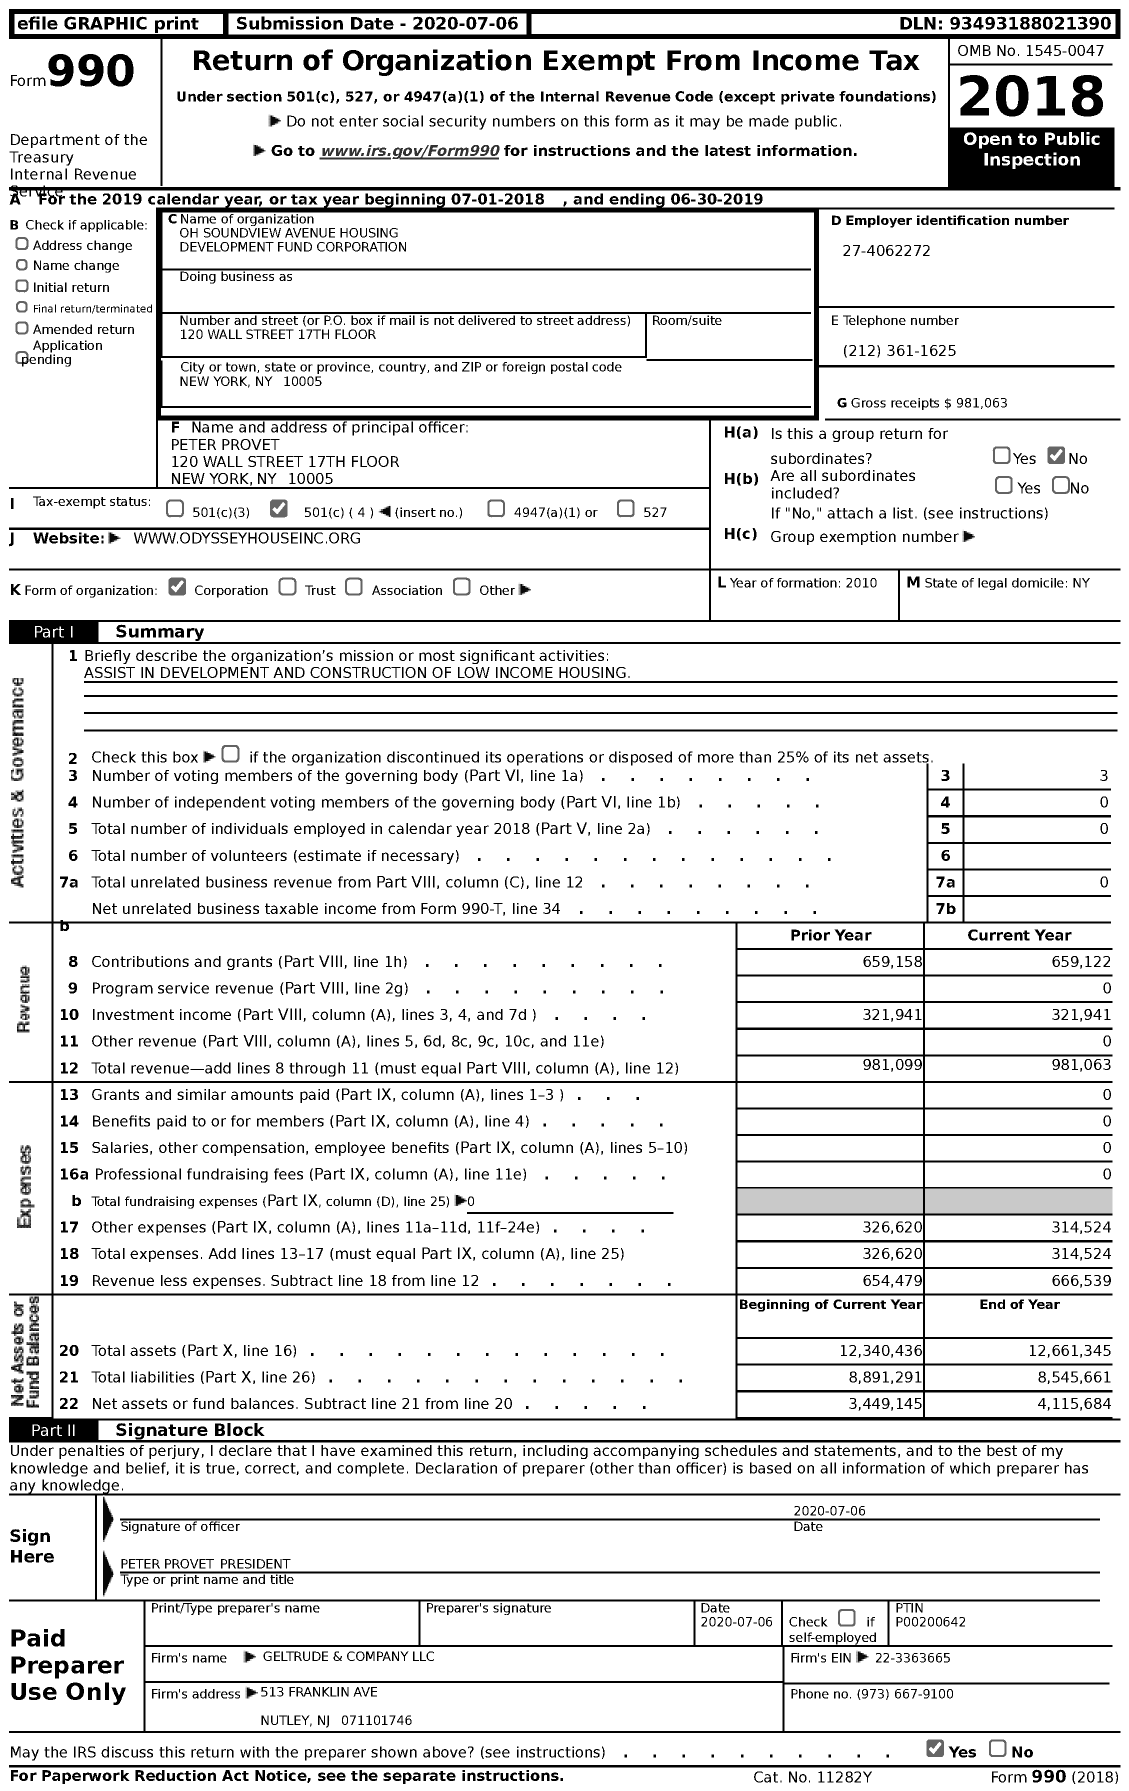 Image of first page of 2018 Form 990 for Oh Soundview Avenue Housing Development Fund Corporation